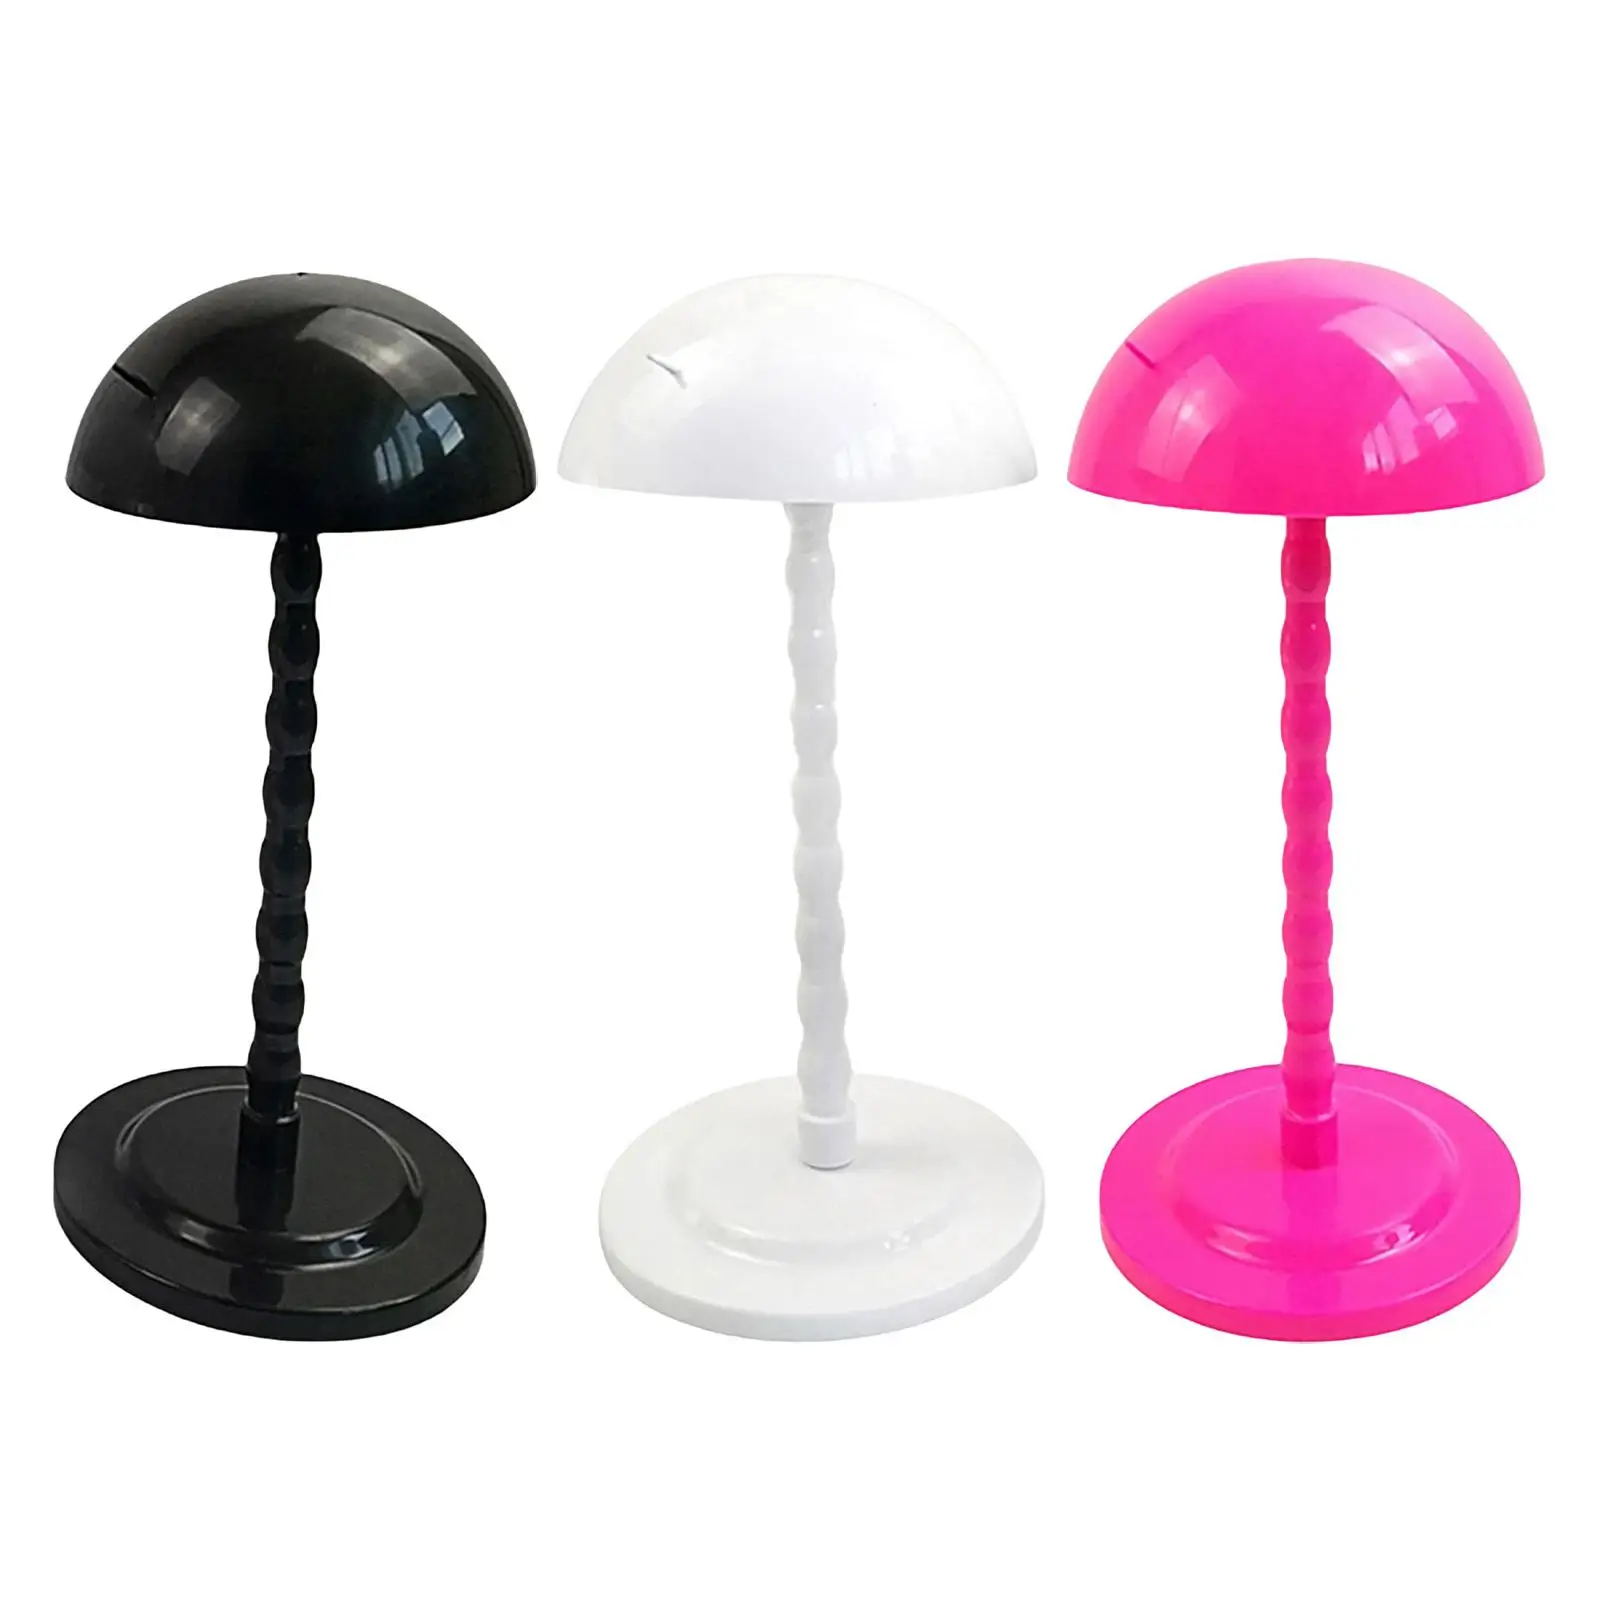 Wig Head Stand Portable Collapsible Mushroom Top Non-Slip Durable Practical Dummy Display Holder for Styling Drying Toupee Tool